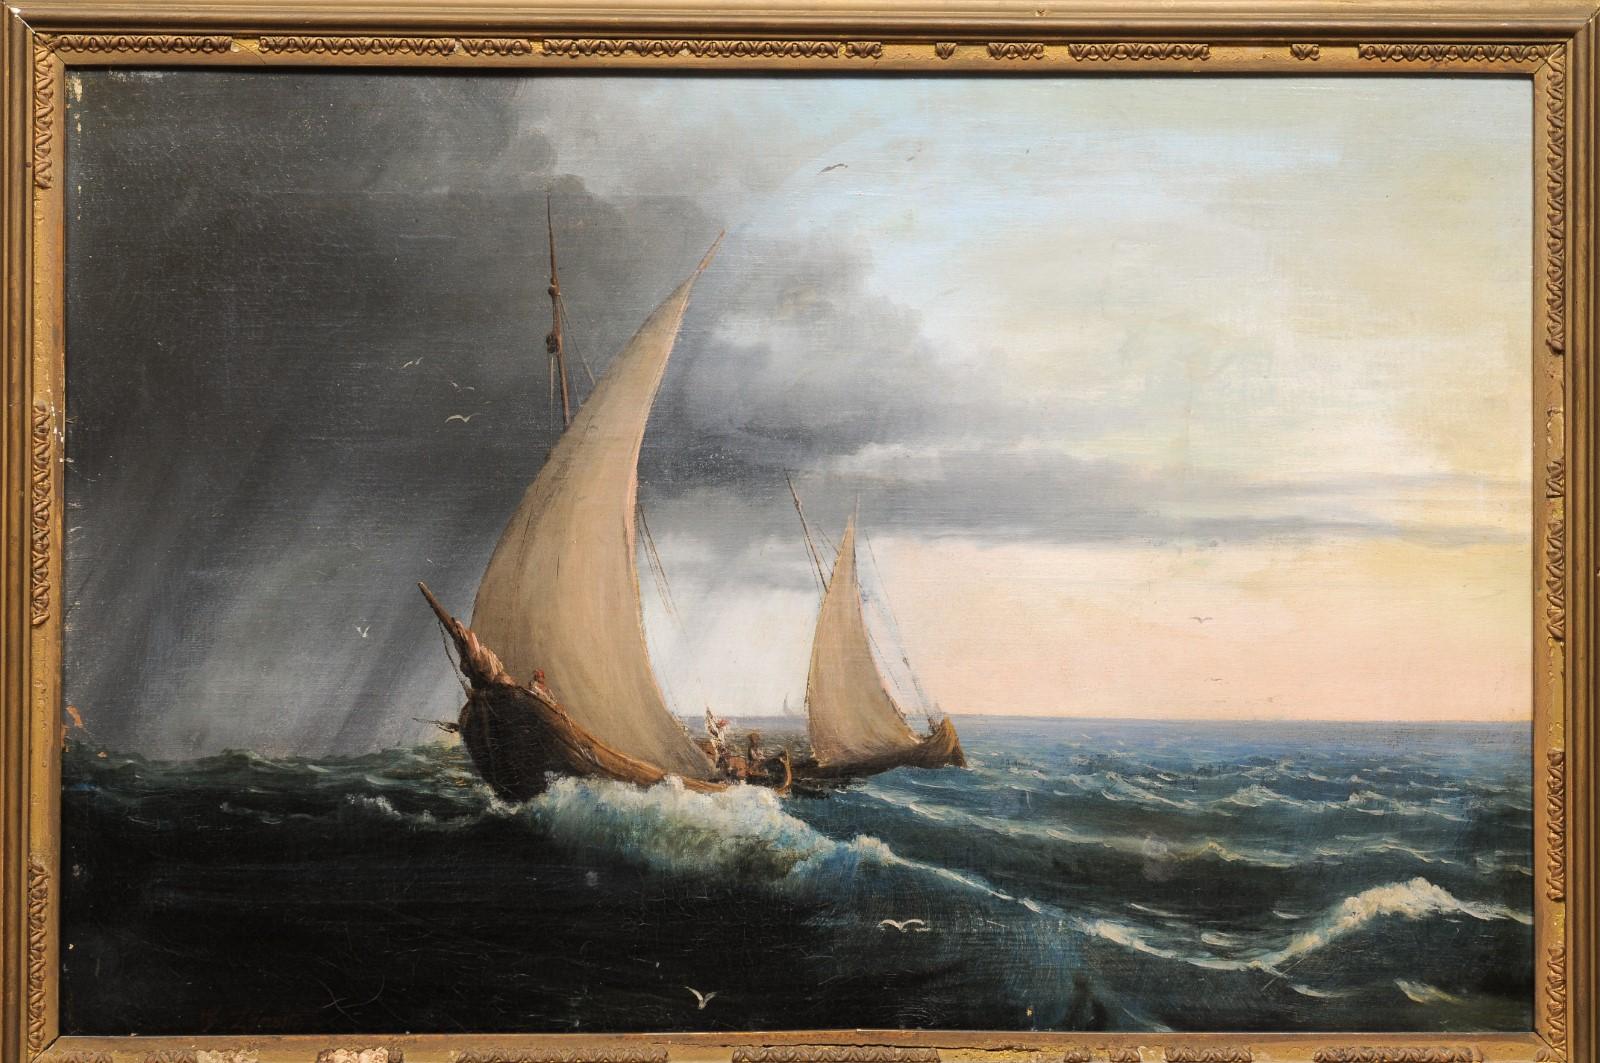 Giltwood Framed 19th Century Italian Oil on Canvas Seascape Painting In Fair Condition For Sale In Atlanta, GA